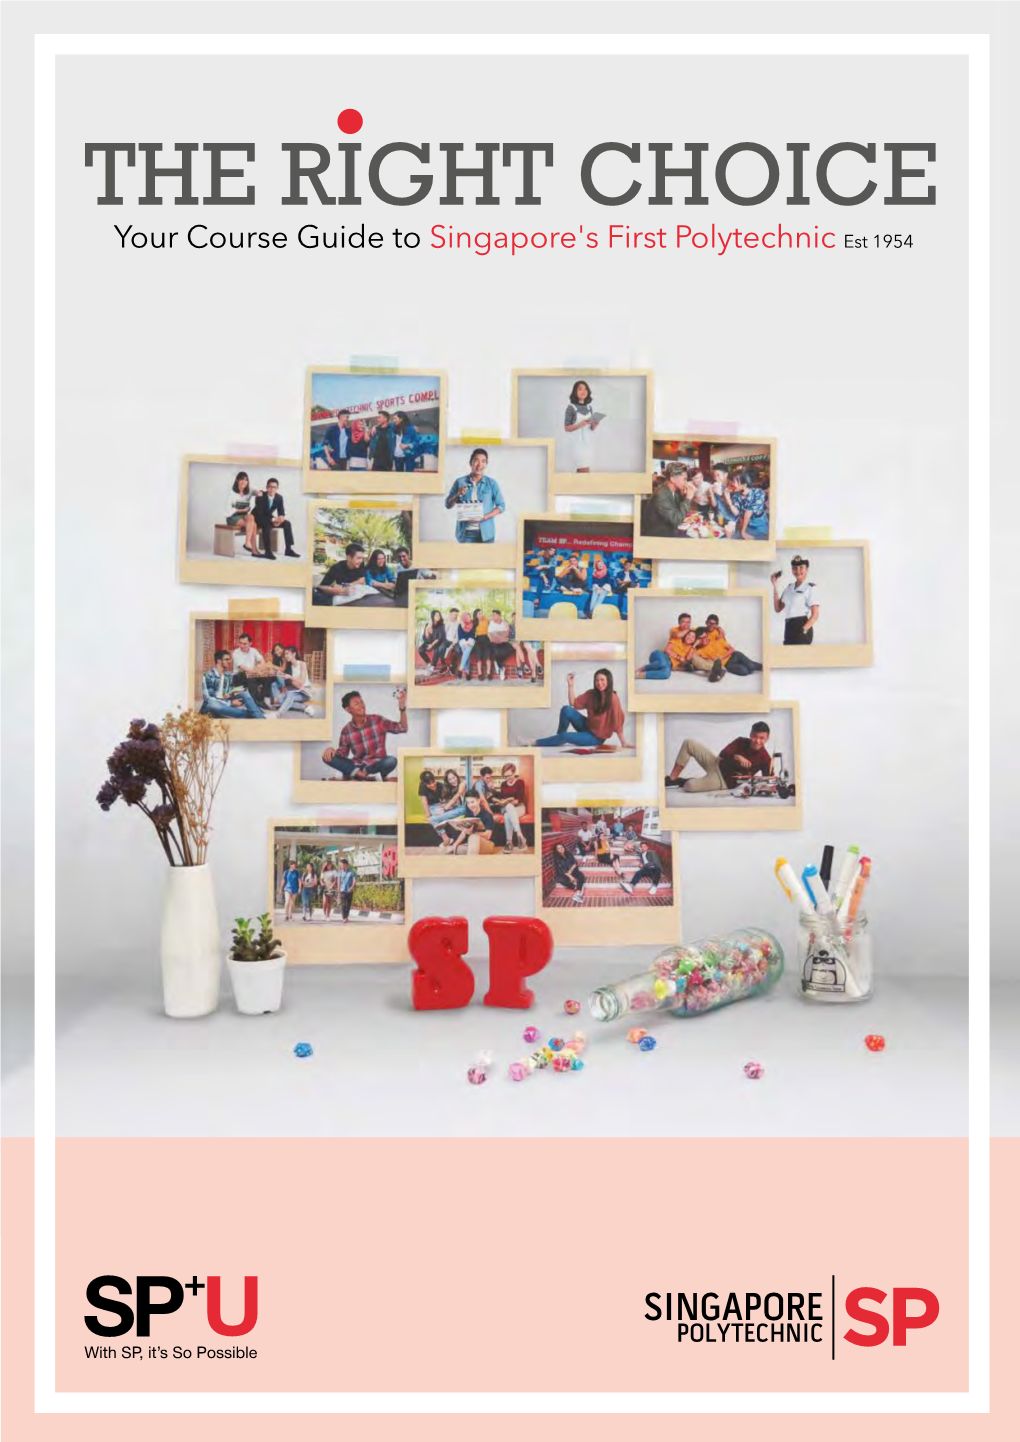 THE RIGHT CHOICE Your Course Guide to Singapore's First Polytechnic Est 1954 the SP EXPERIENCE